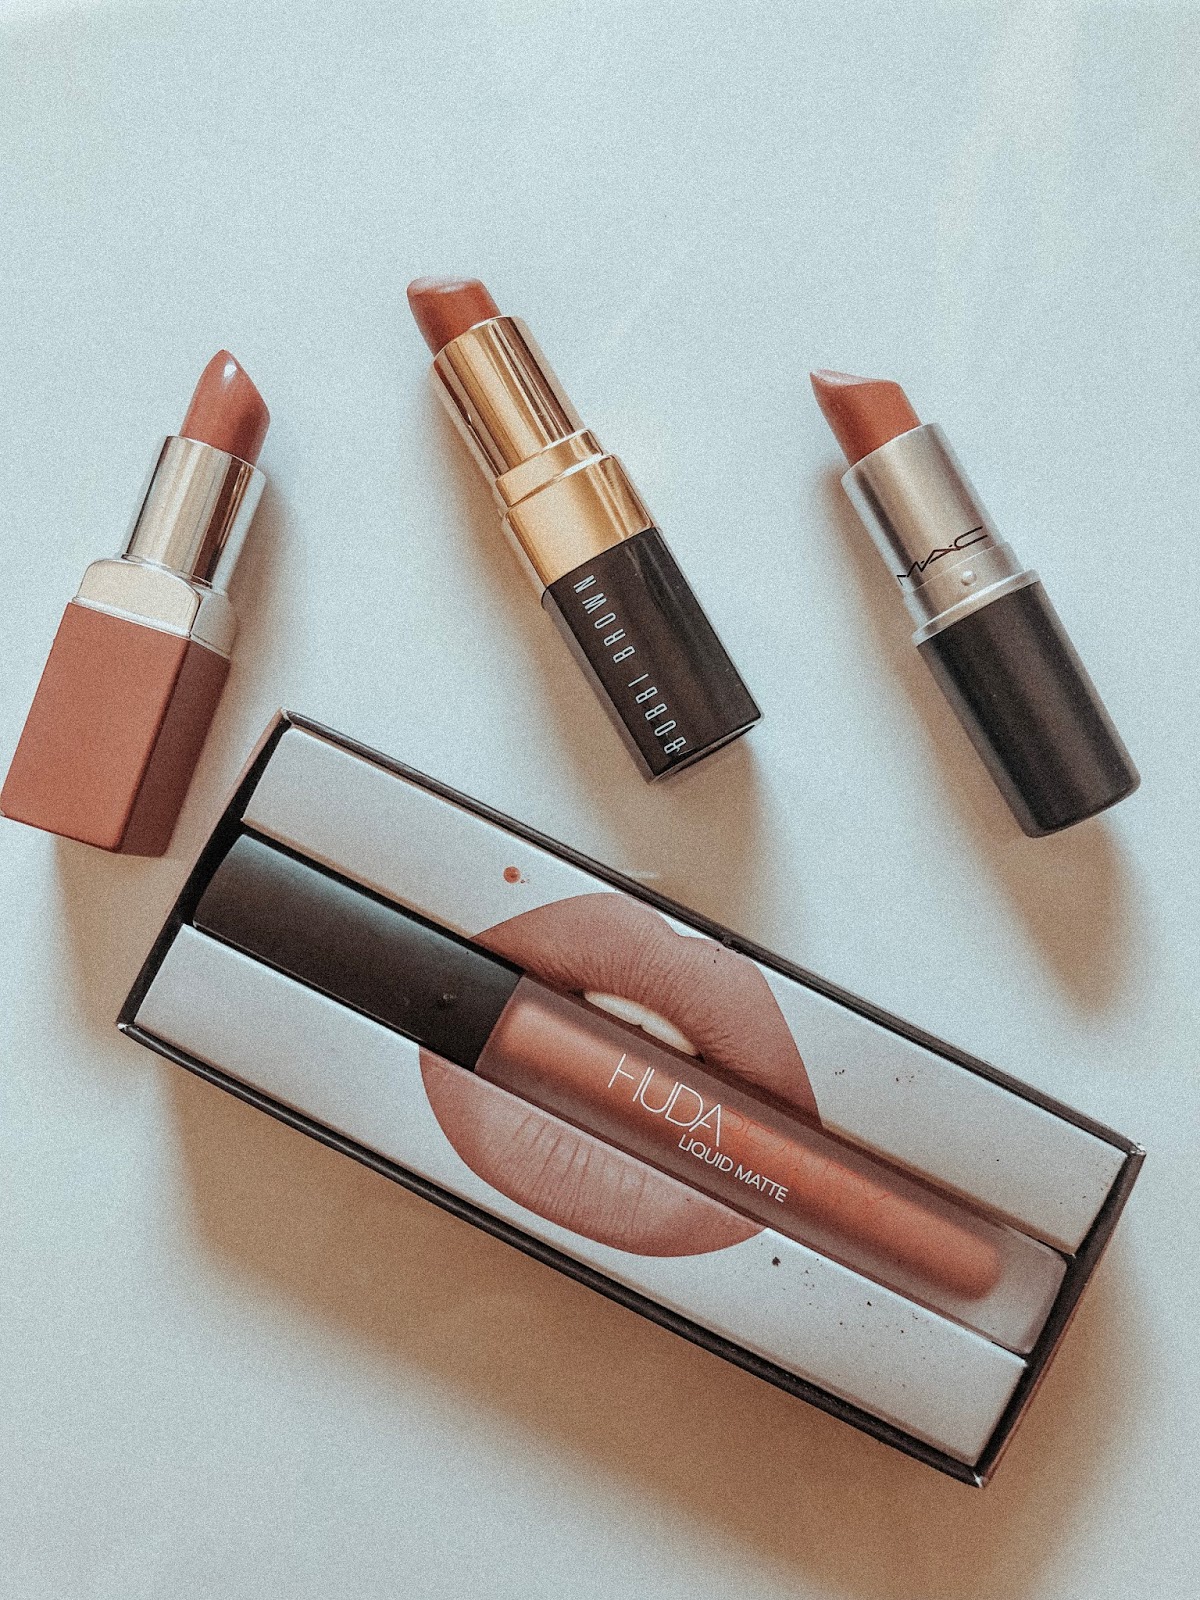 NUDE LIPSTICKS YOU CAN'T LIVE WITHOUT